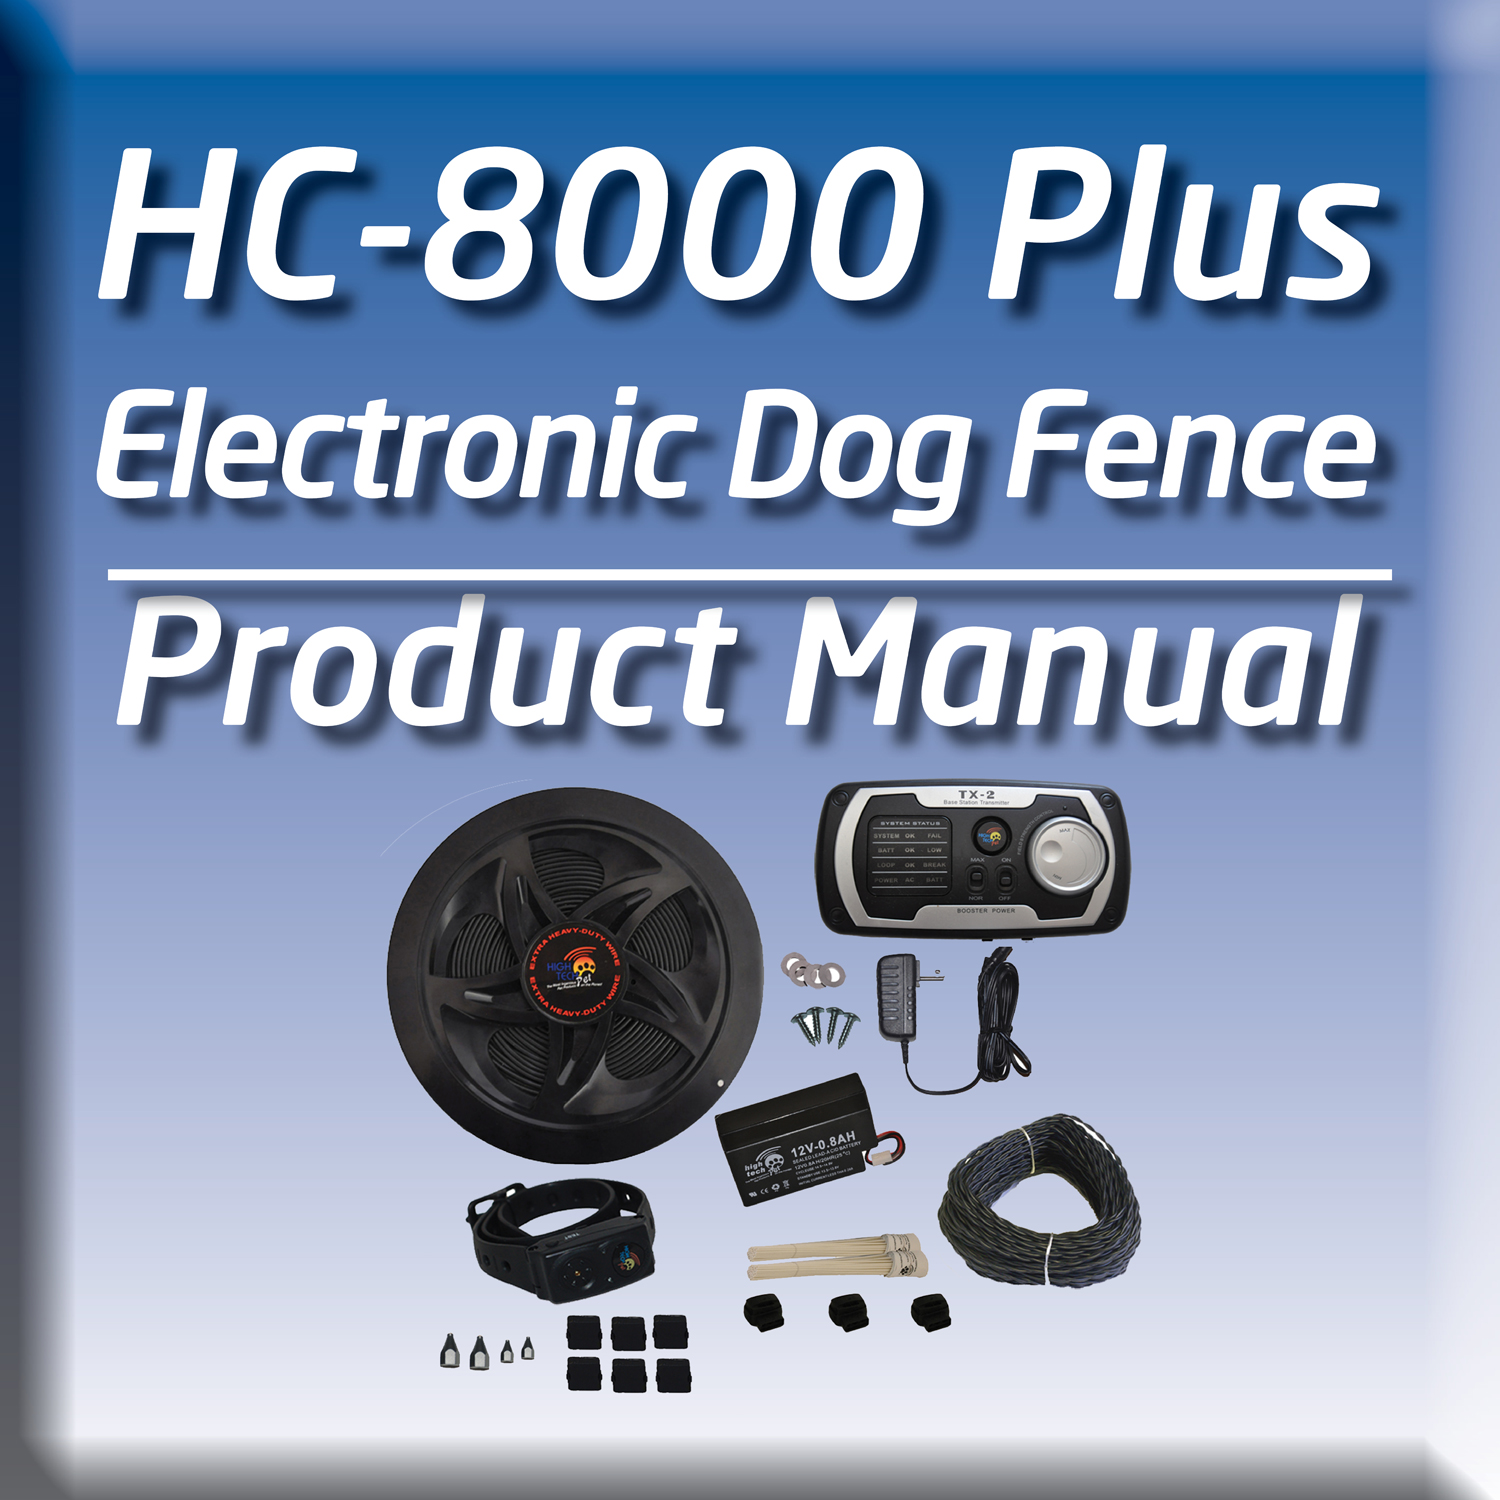 Having trouble with your electric fence? Try our invisible dog fence manual